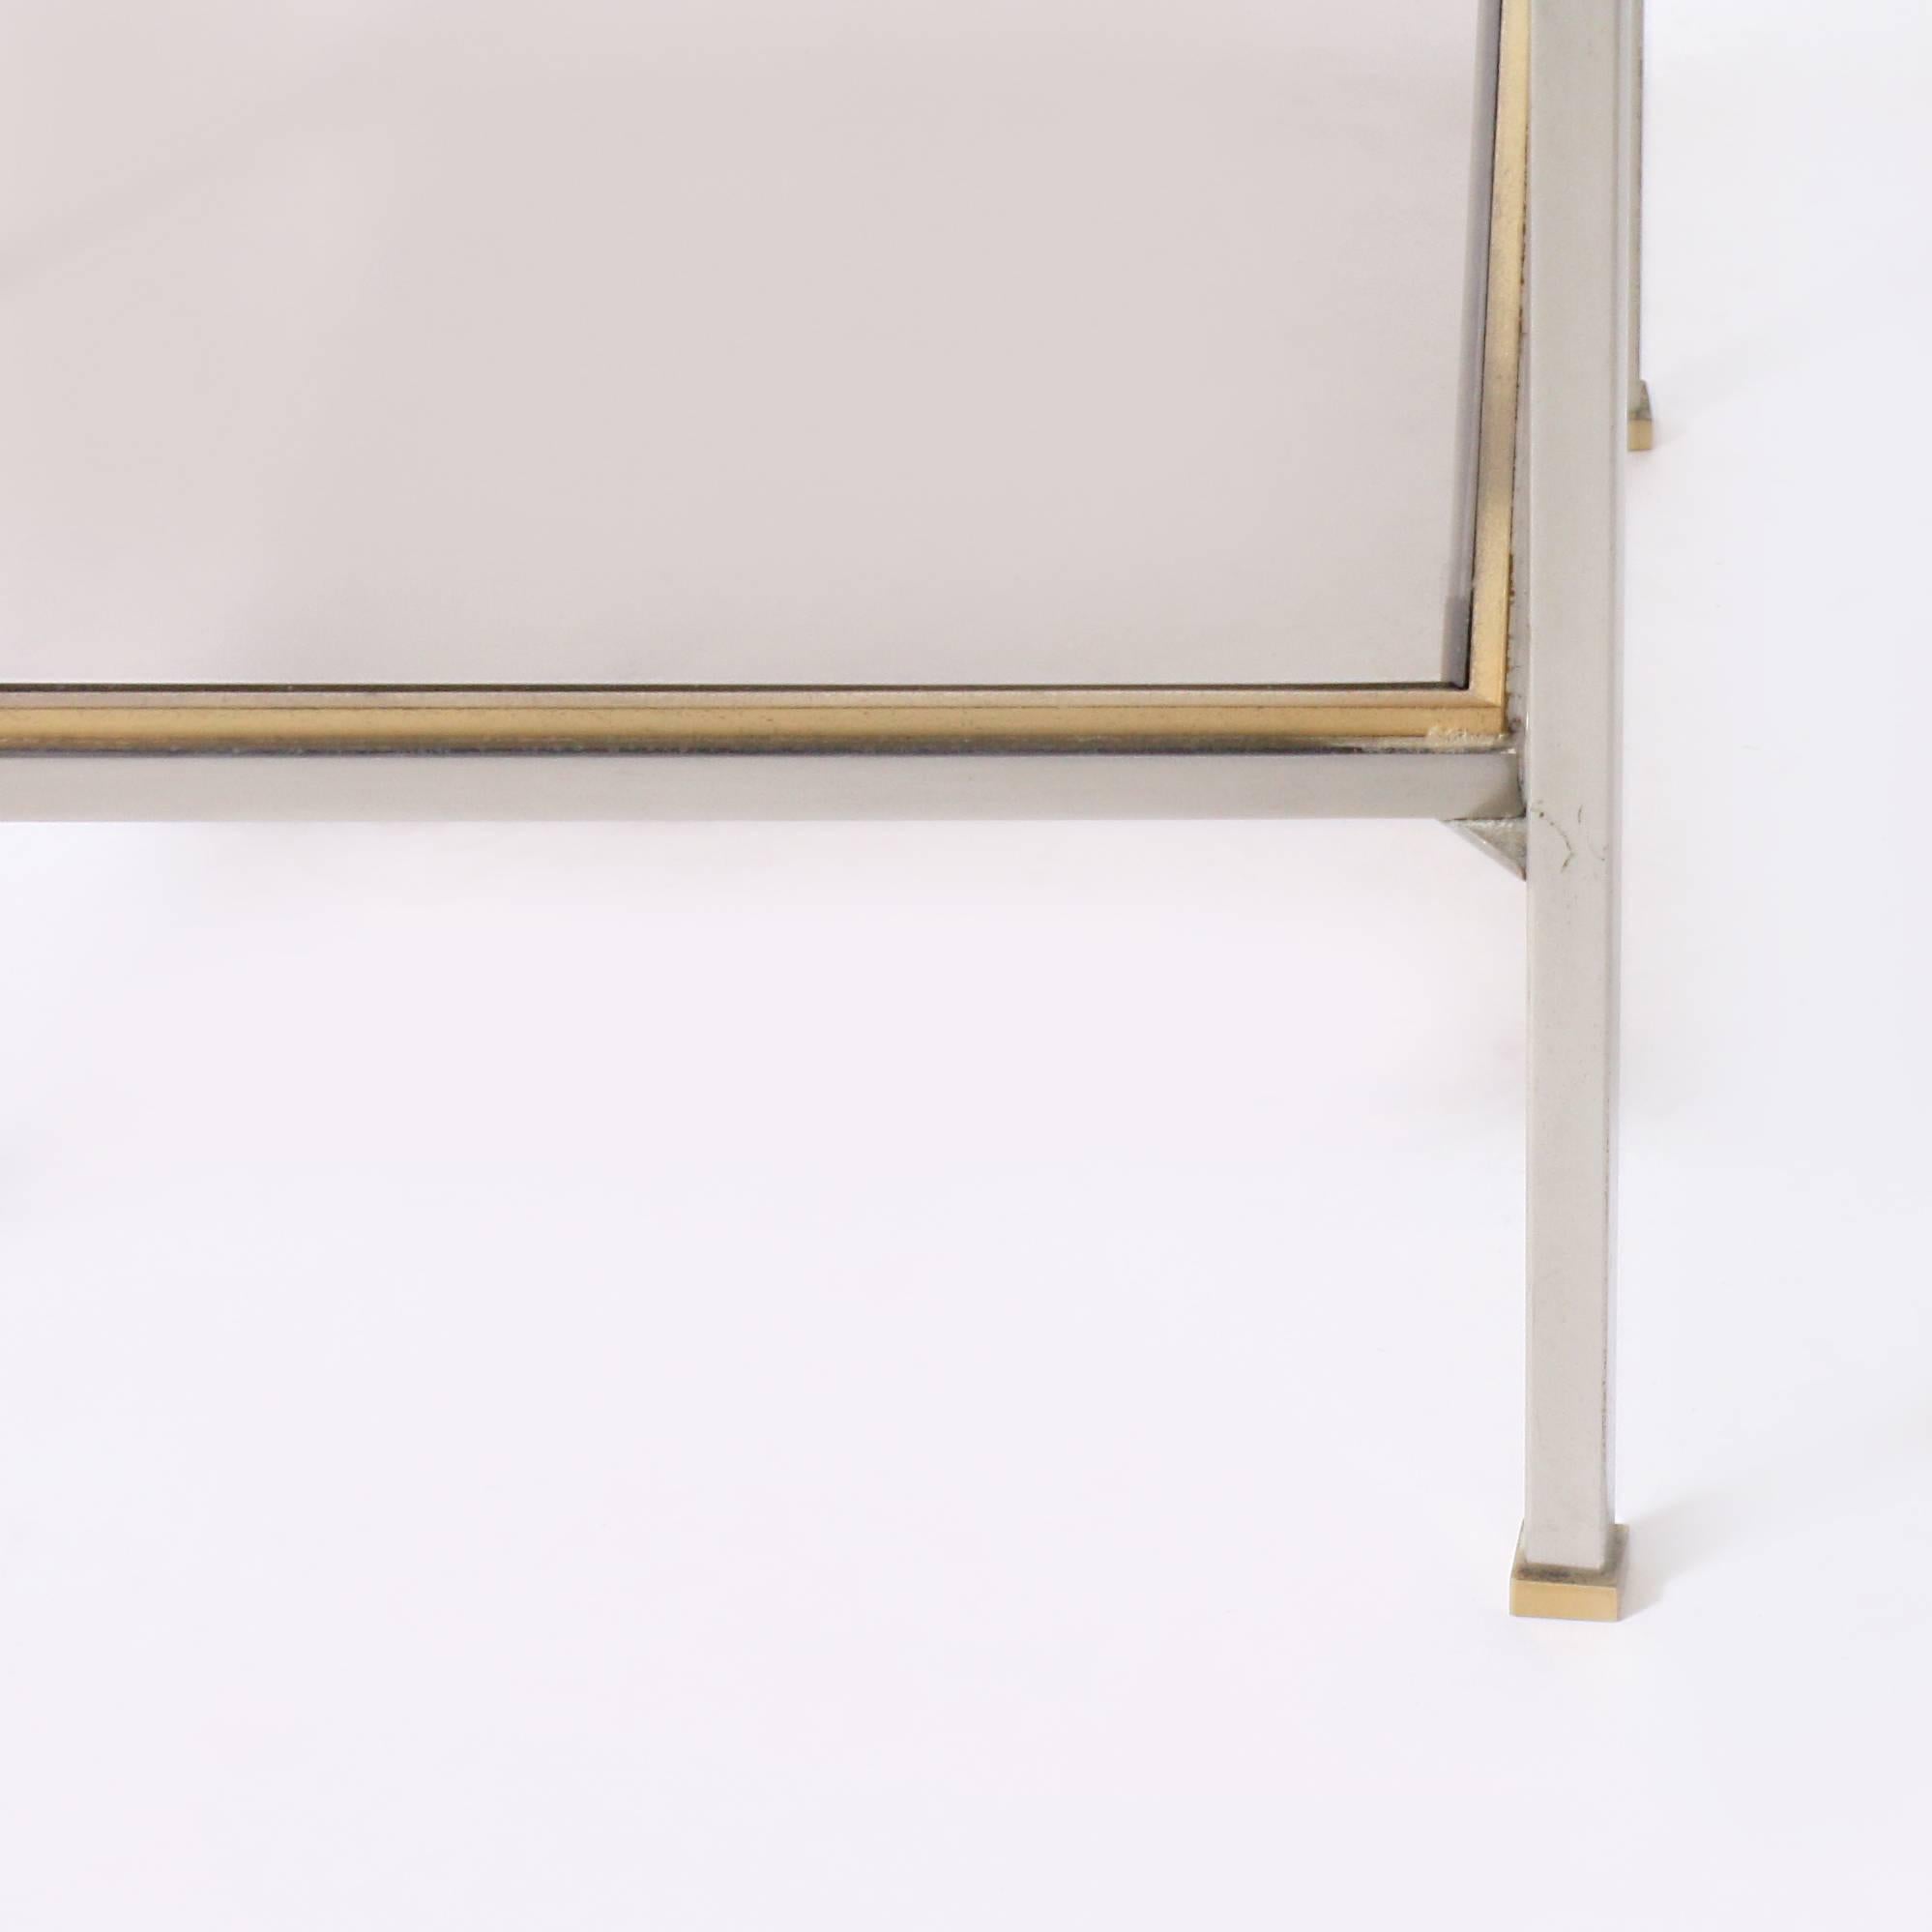 Nickel and brass cigarette table with glass shelves.